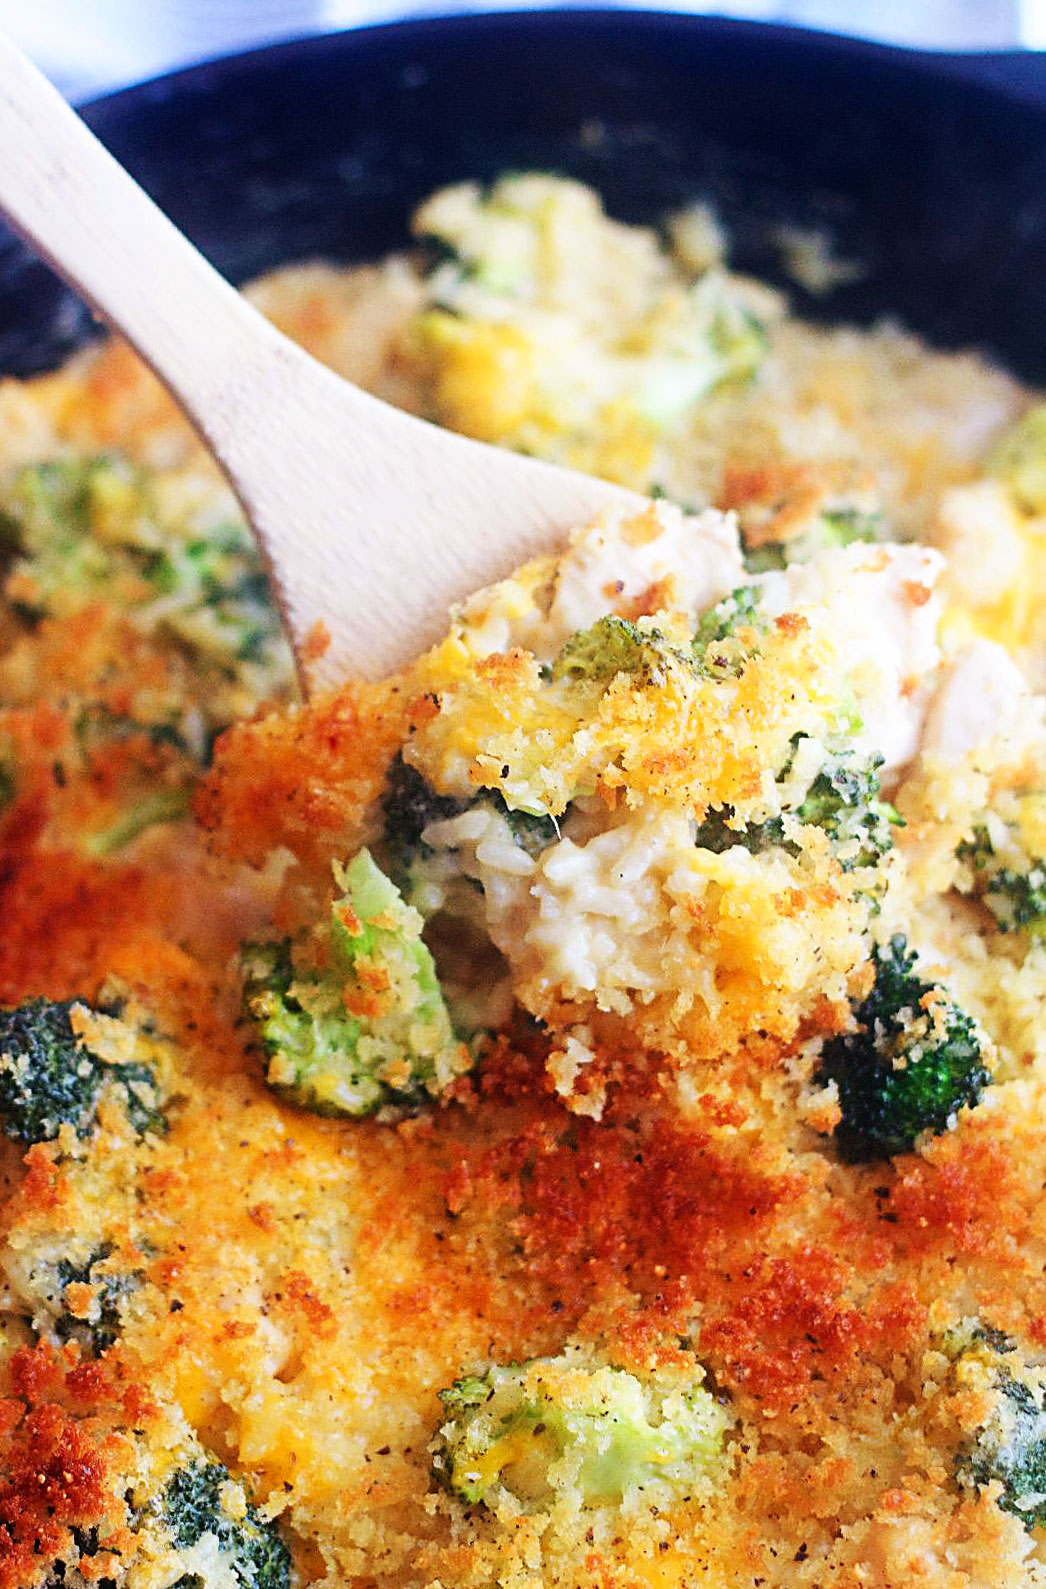 This Cheesy Chicken, Rice and Broccoli is a delicious dinner all made in just one skillet. Life-in-the-Lofthouse.com